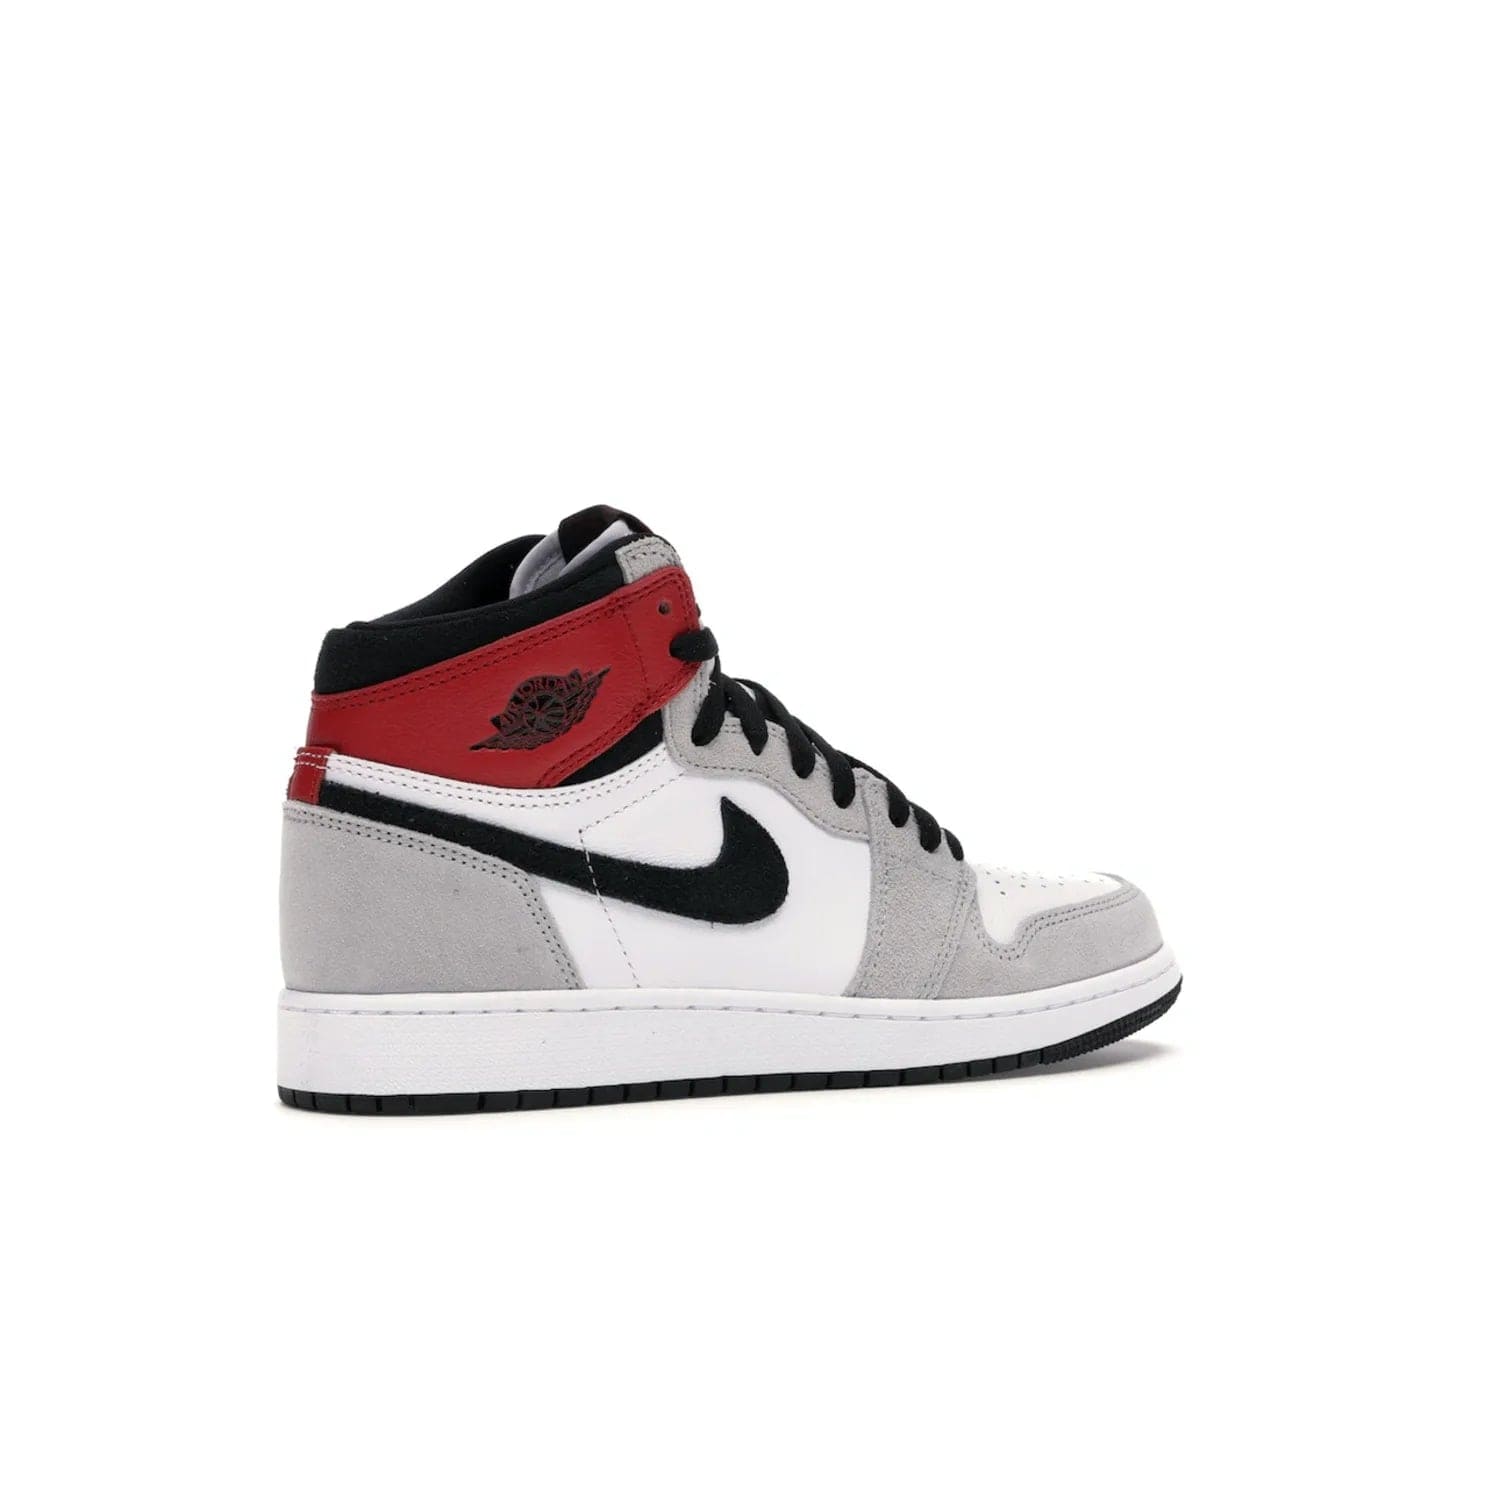 Jordan 1 Retro High Light Smoke Grey (GS) - Image 34 - Only at www.BallersClubKickz.com - Jordan 1 Retro High Light Smoke Grey (GS) features shades of grey, black, and Varsity Red with a bold silhouette. Premium white leather and suede overlays create a unique look. Released July 2020, offering style and performance. Perfect sneaker for any collector or fan.